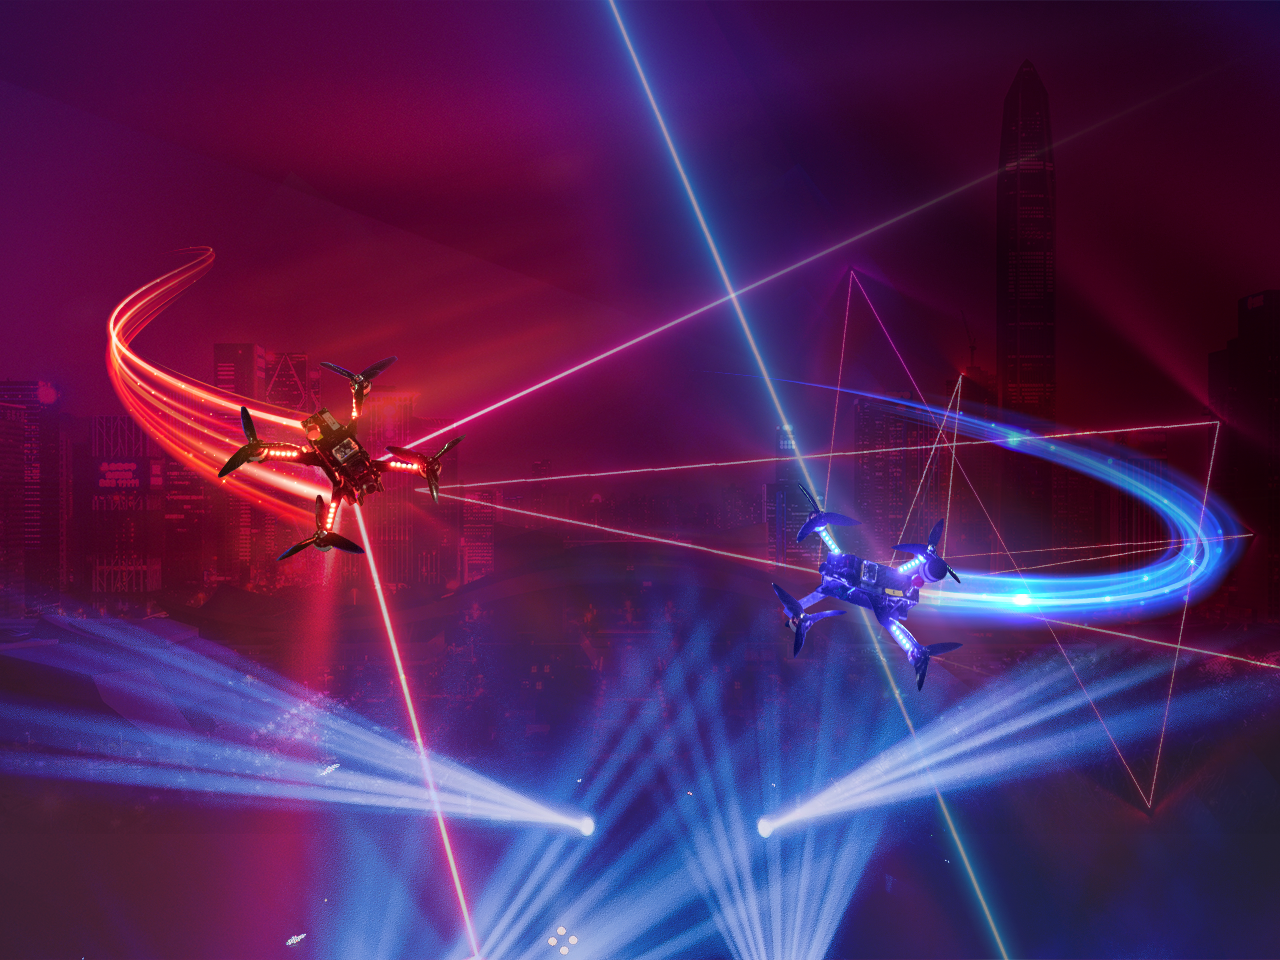 Team Drone Racing Challenges For Special Events - TLC Creative Technology